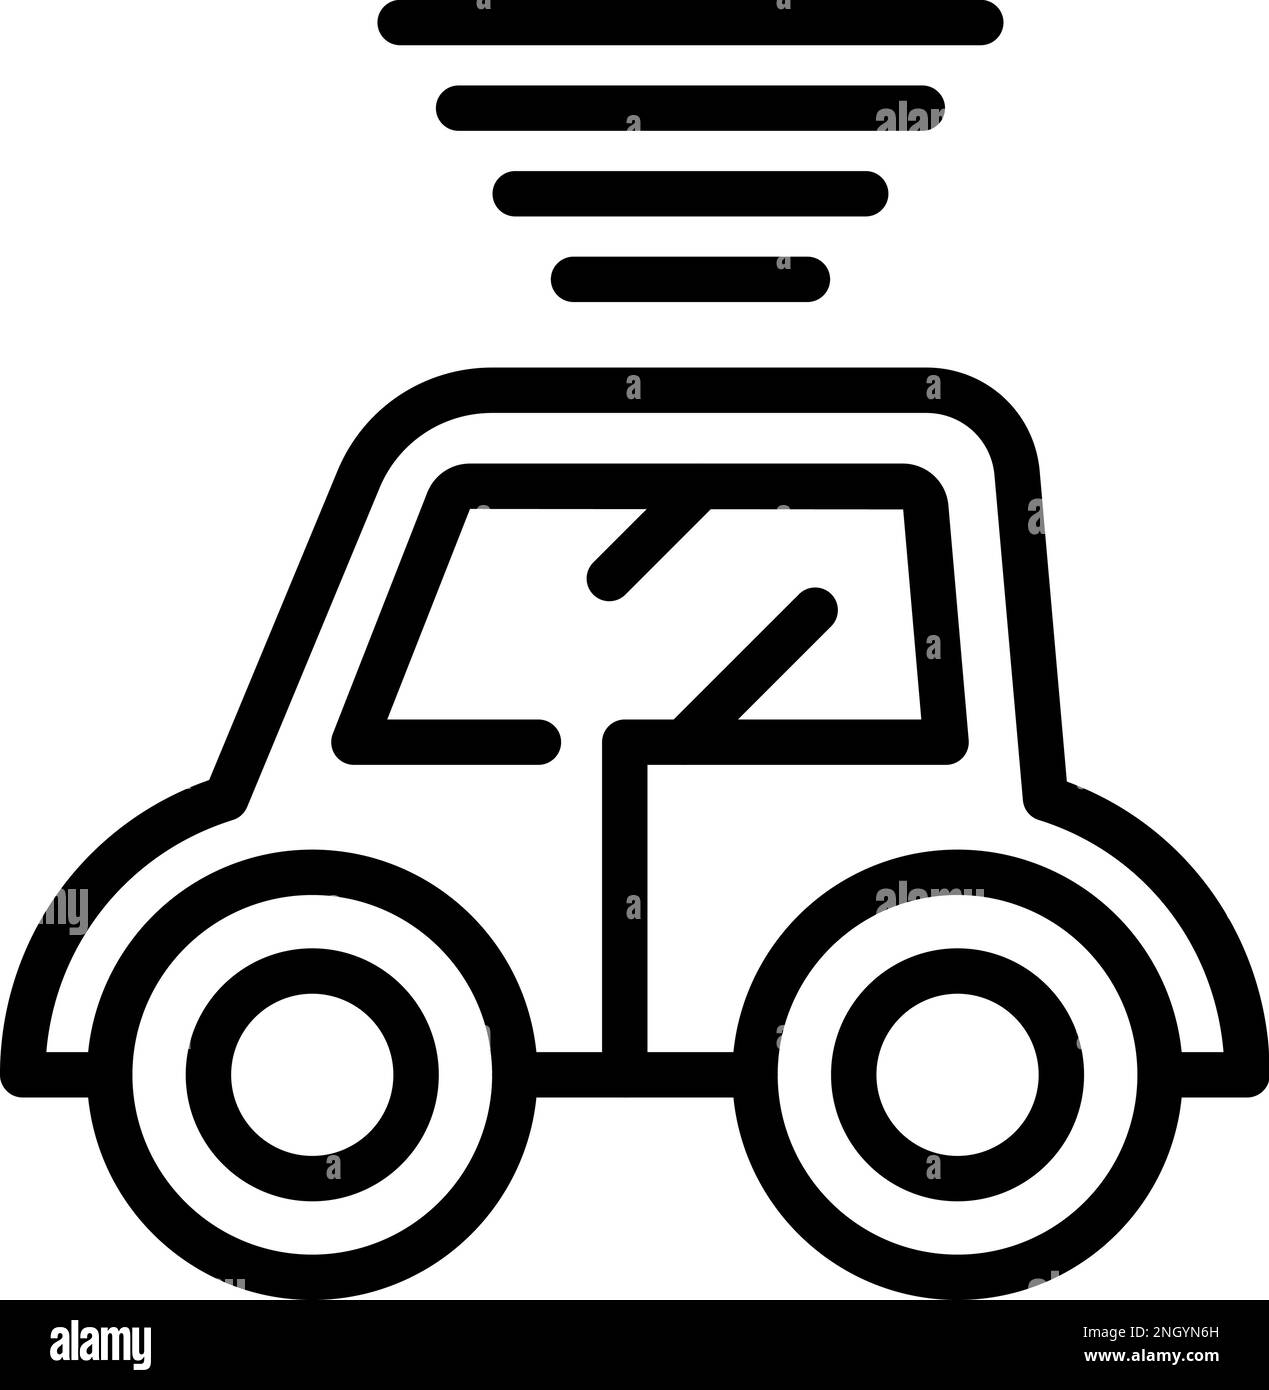 Rc car icon outline vector. Toy control. Model hobby Stock Vector